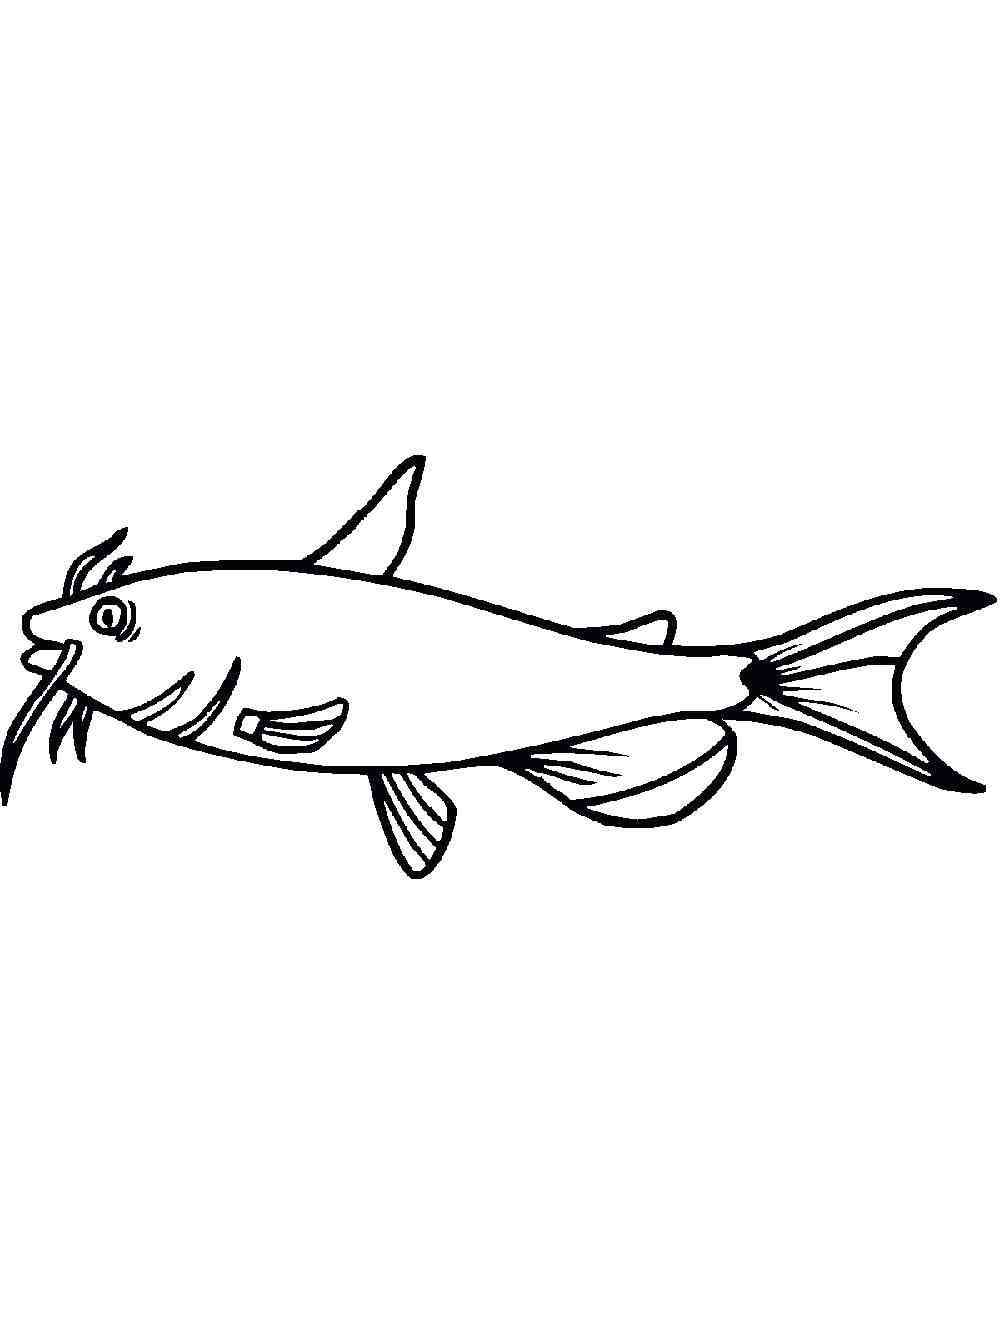 Catfish 15 coloring page